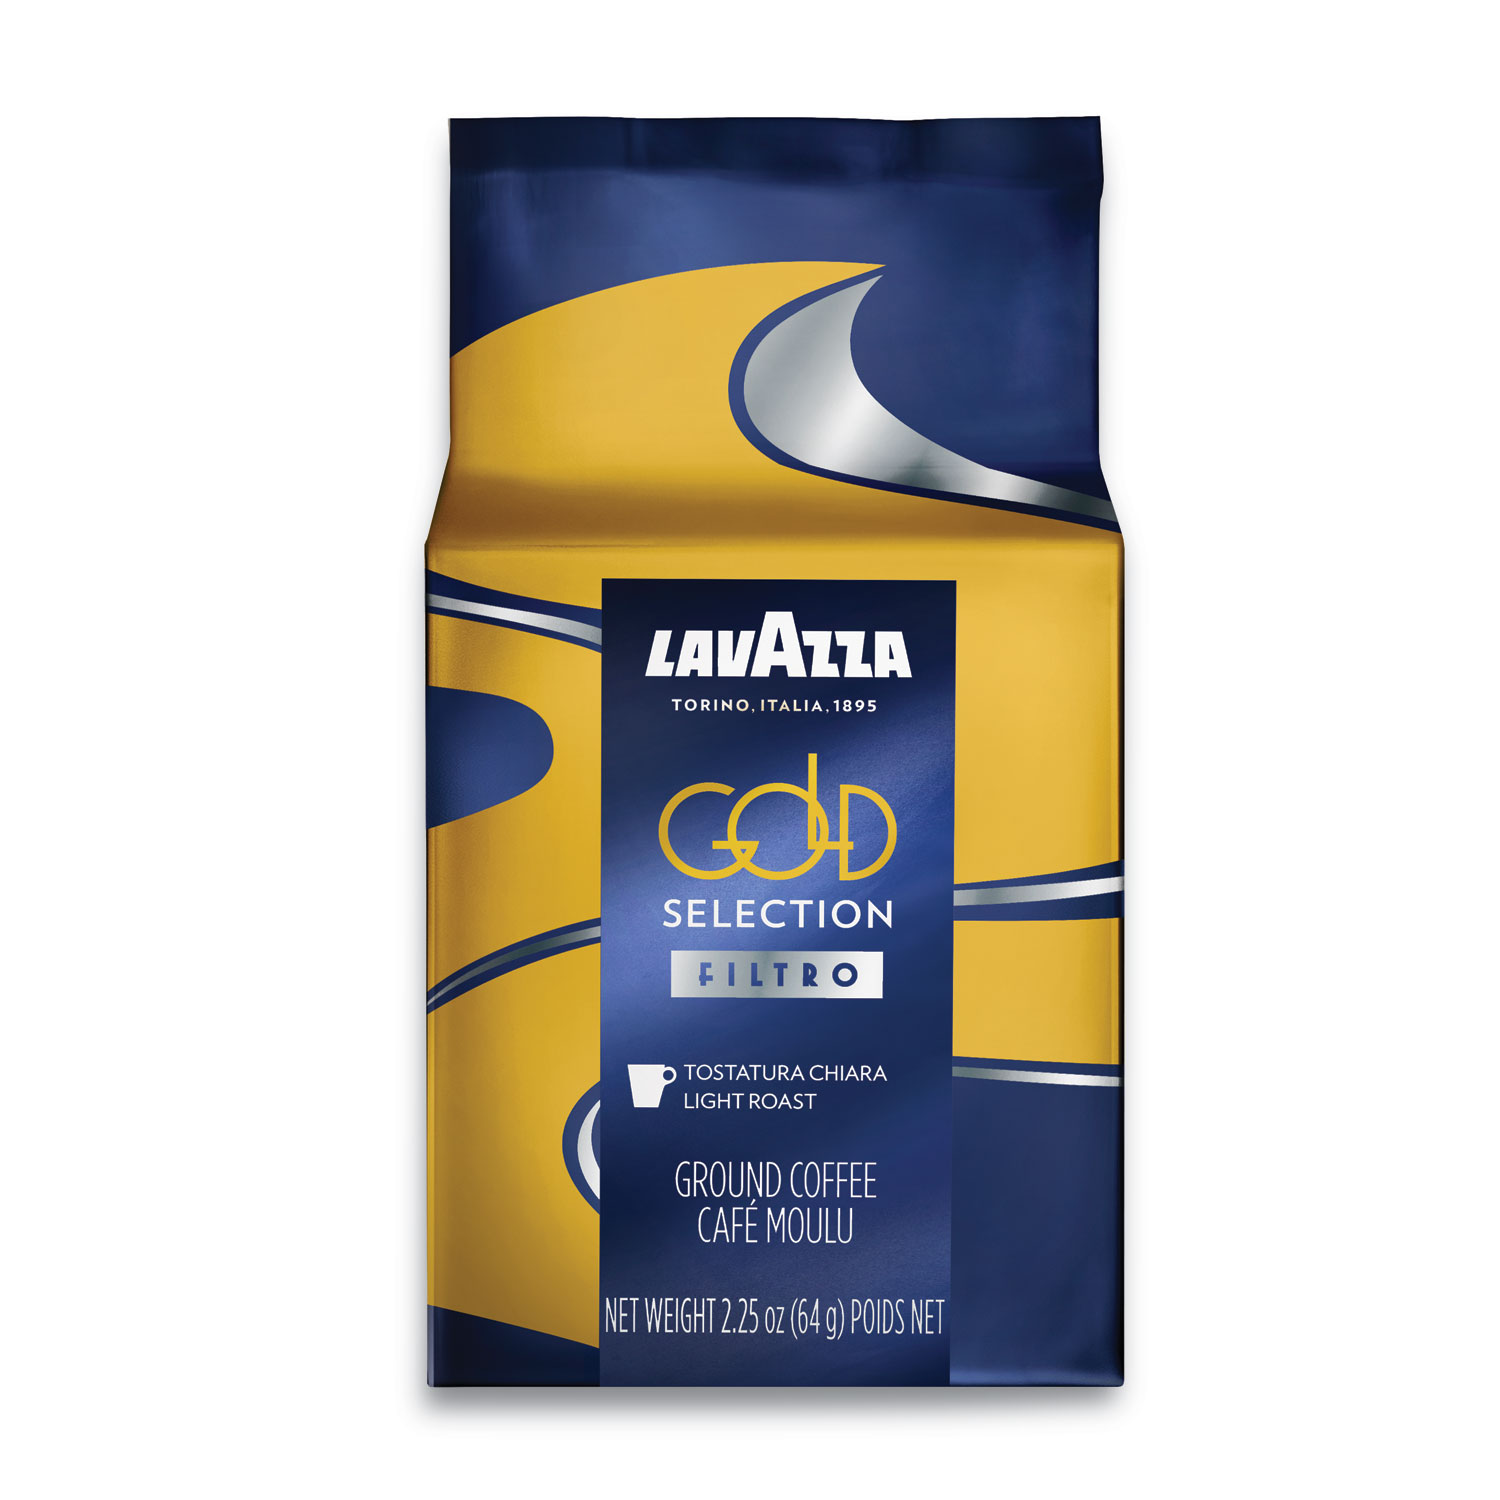  Lavazza 3425 Gold Selection Fractional Pack Coffee, Light and Aromatic, 2.25 oz Fraction Pack, 30/Carton (LAV3425) 